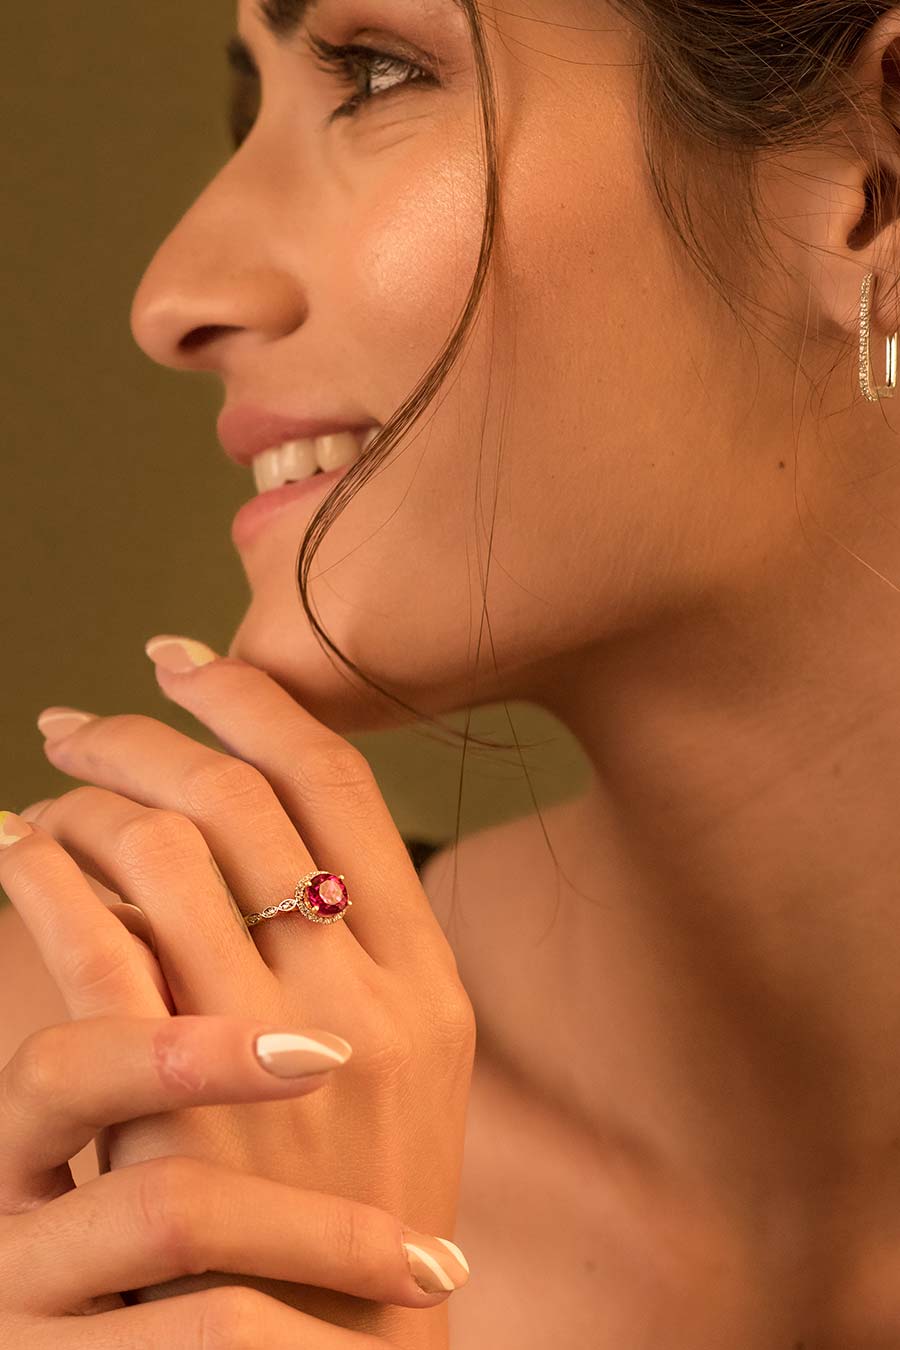 Genuine Ruby Halo Studded Ring in 925 Silver